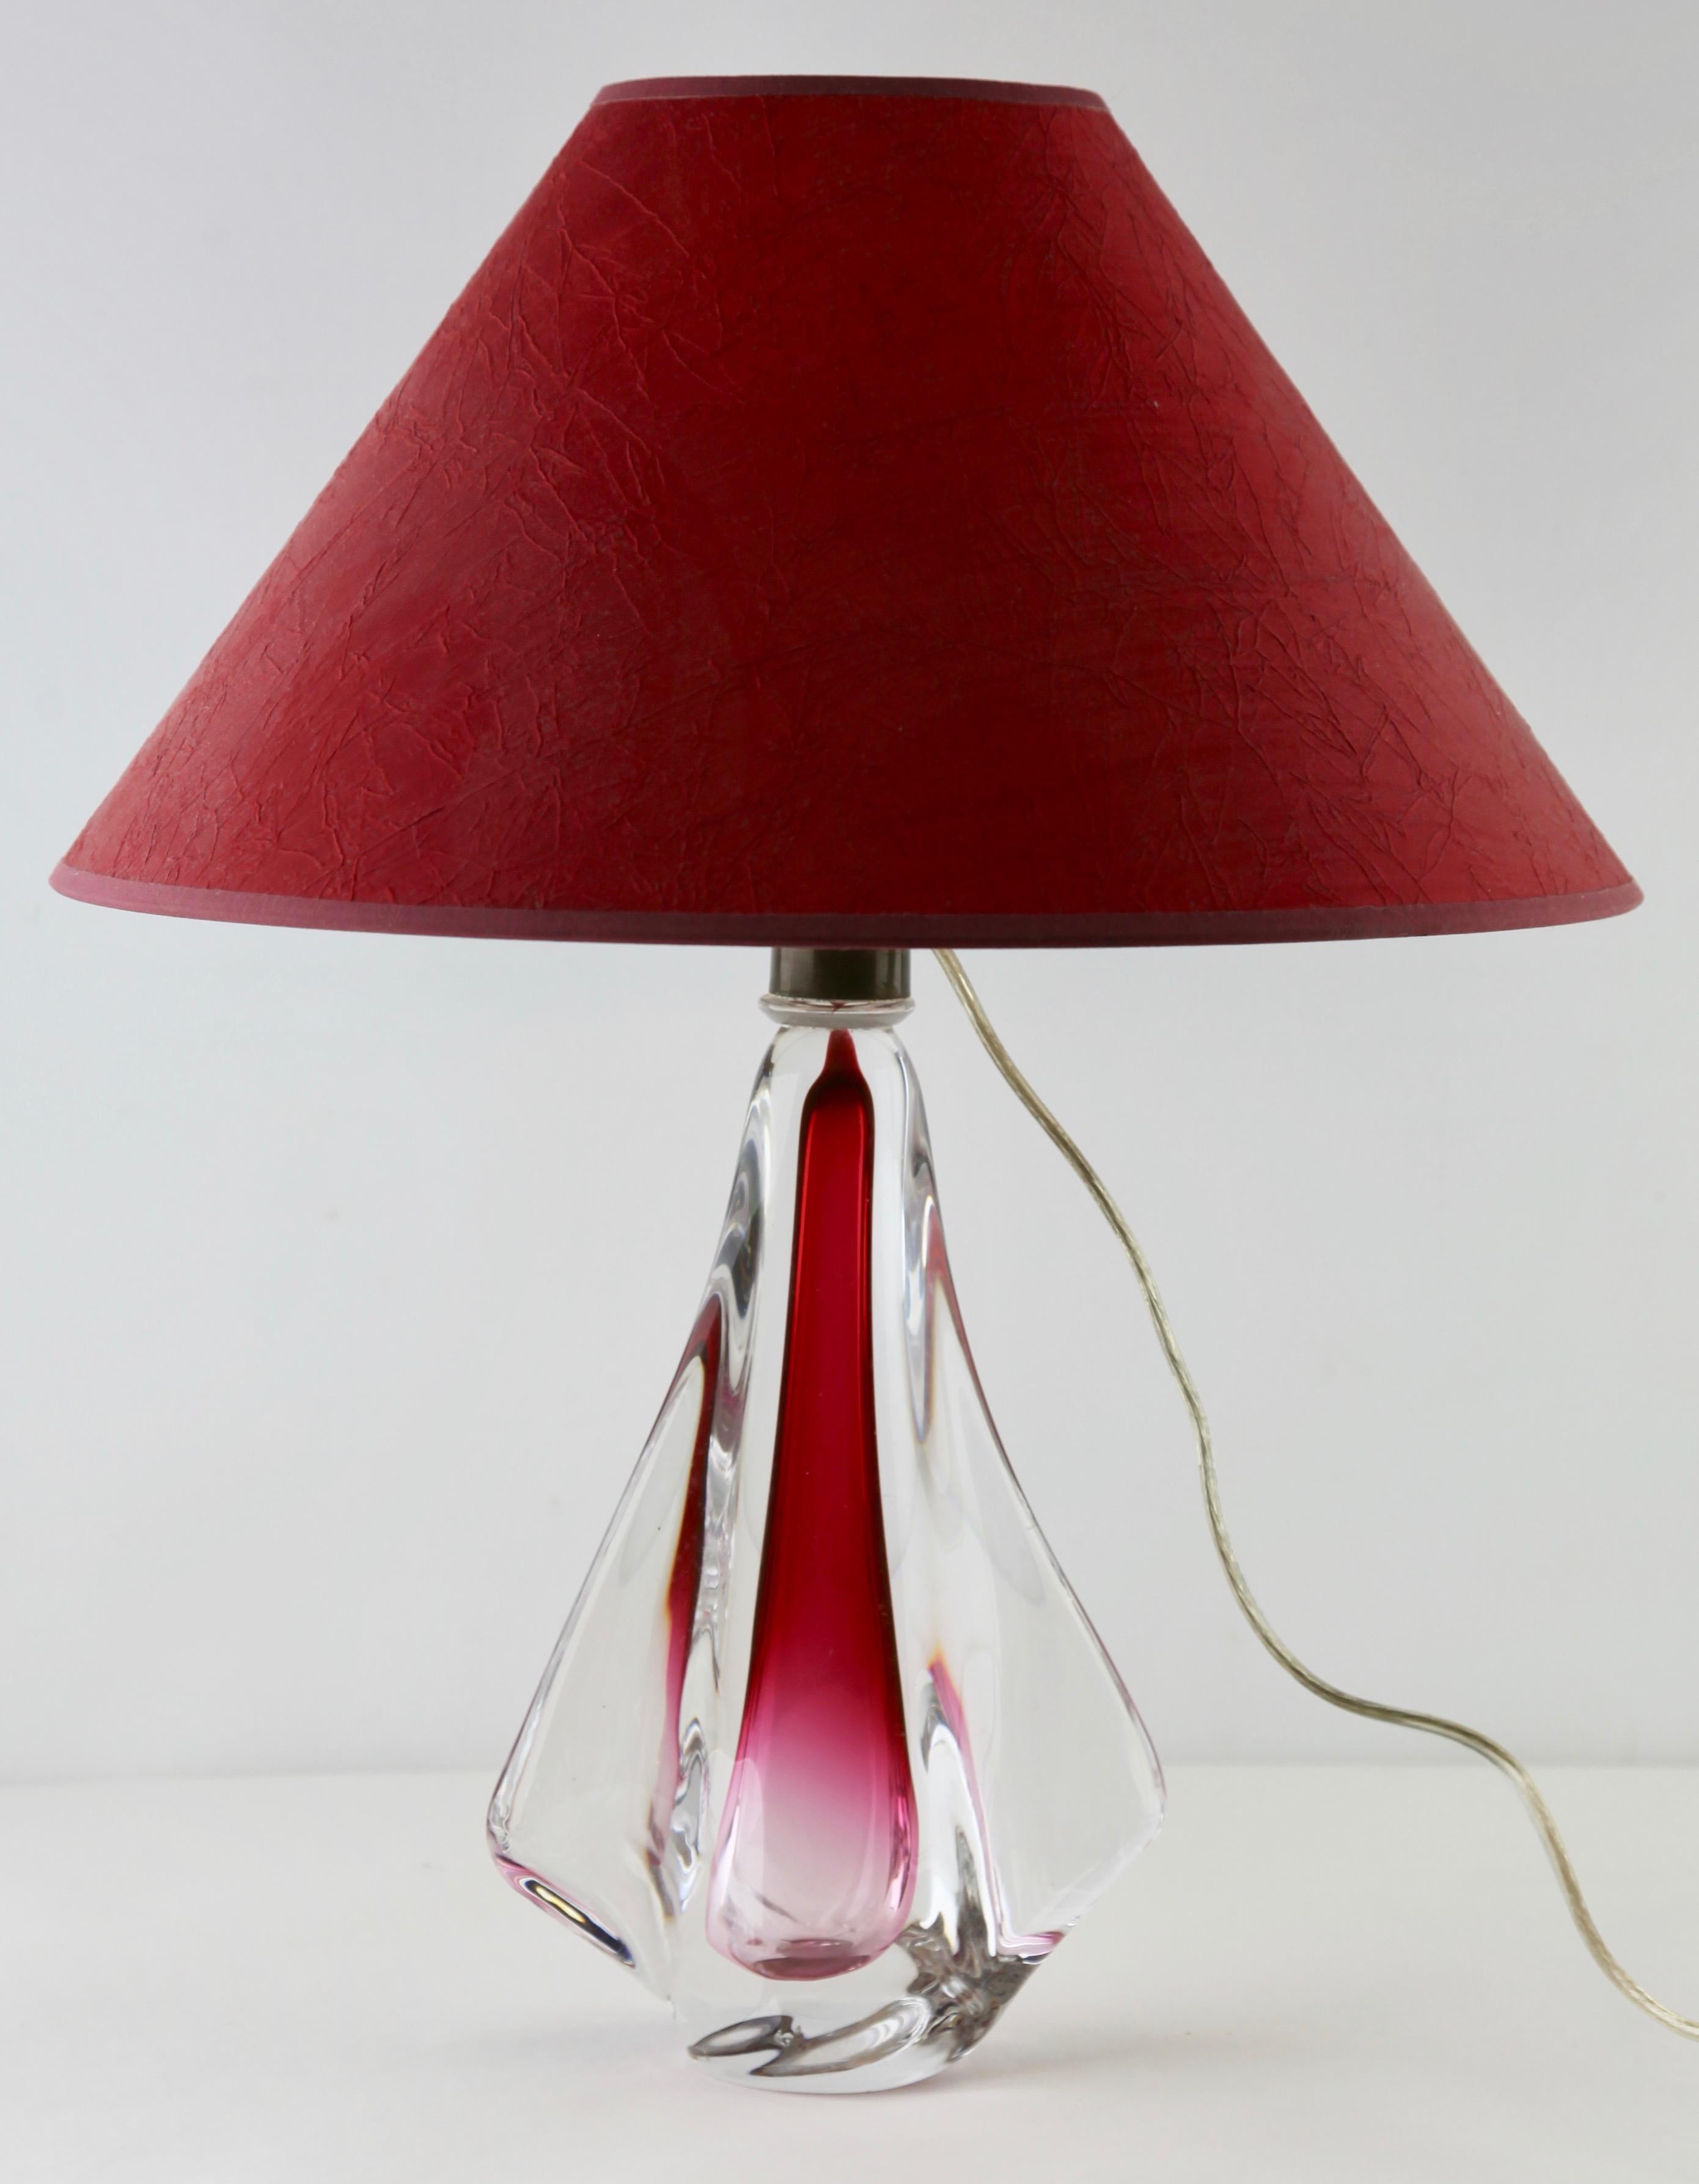 This simple yet dramatic table lamp is in medium size; 12.02 inches excluding the lamp-fitting and shade. The colored core in Classic Val Saint Lambert tint, has been given a thick Sommerso (clear crystal casing) so that the object appears delicate